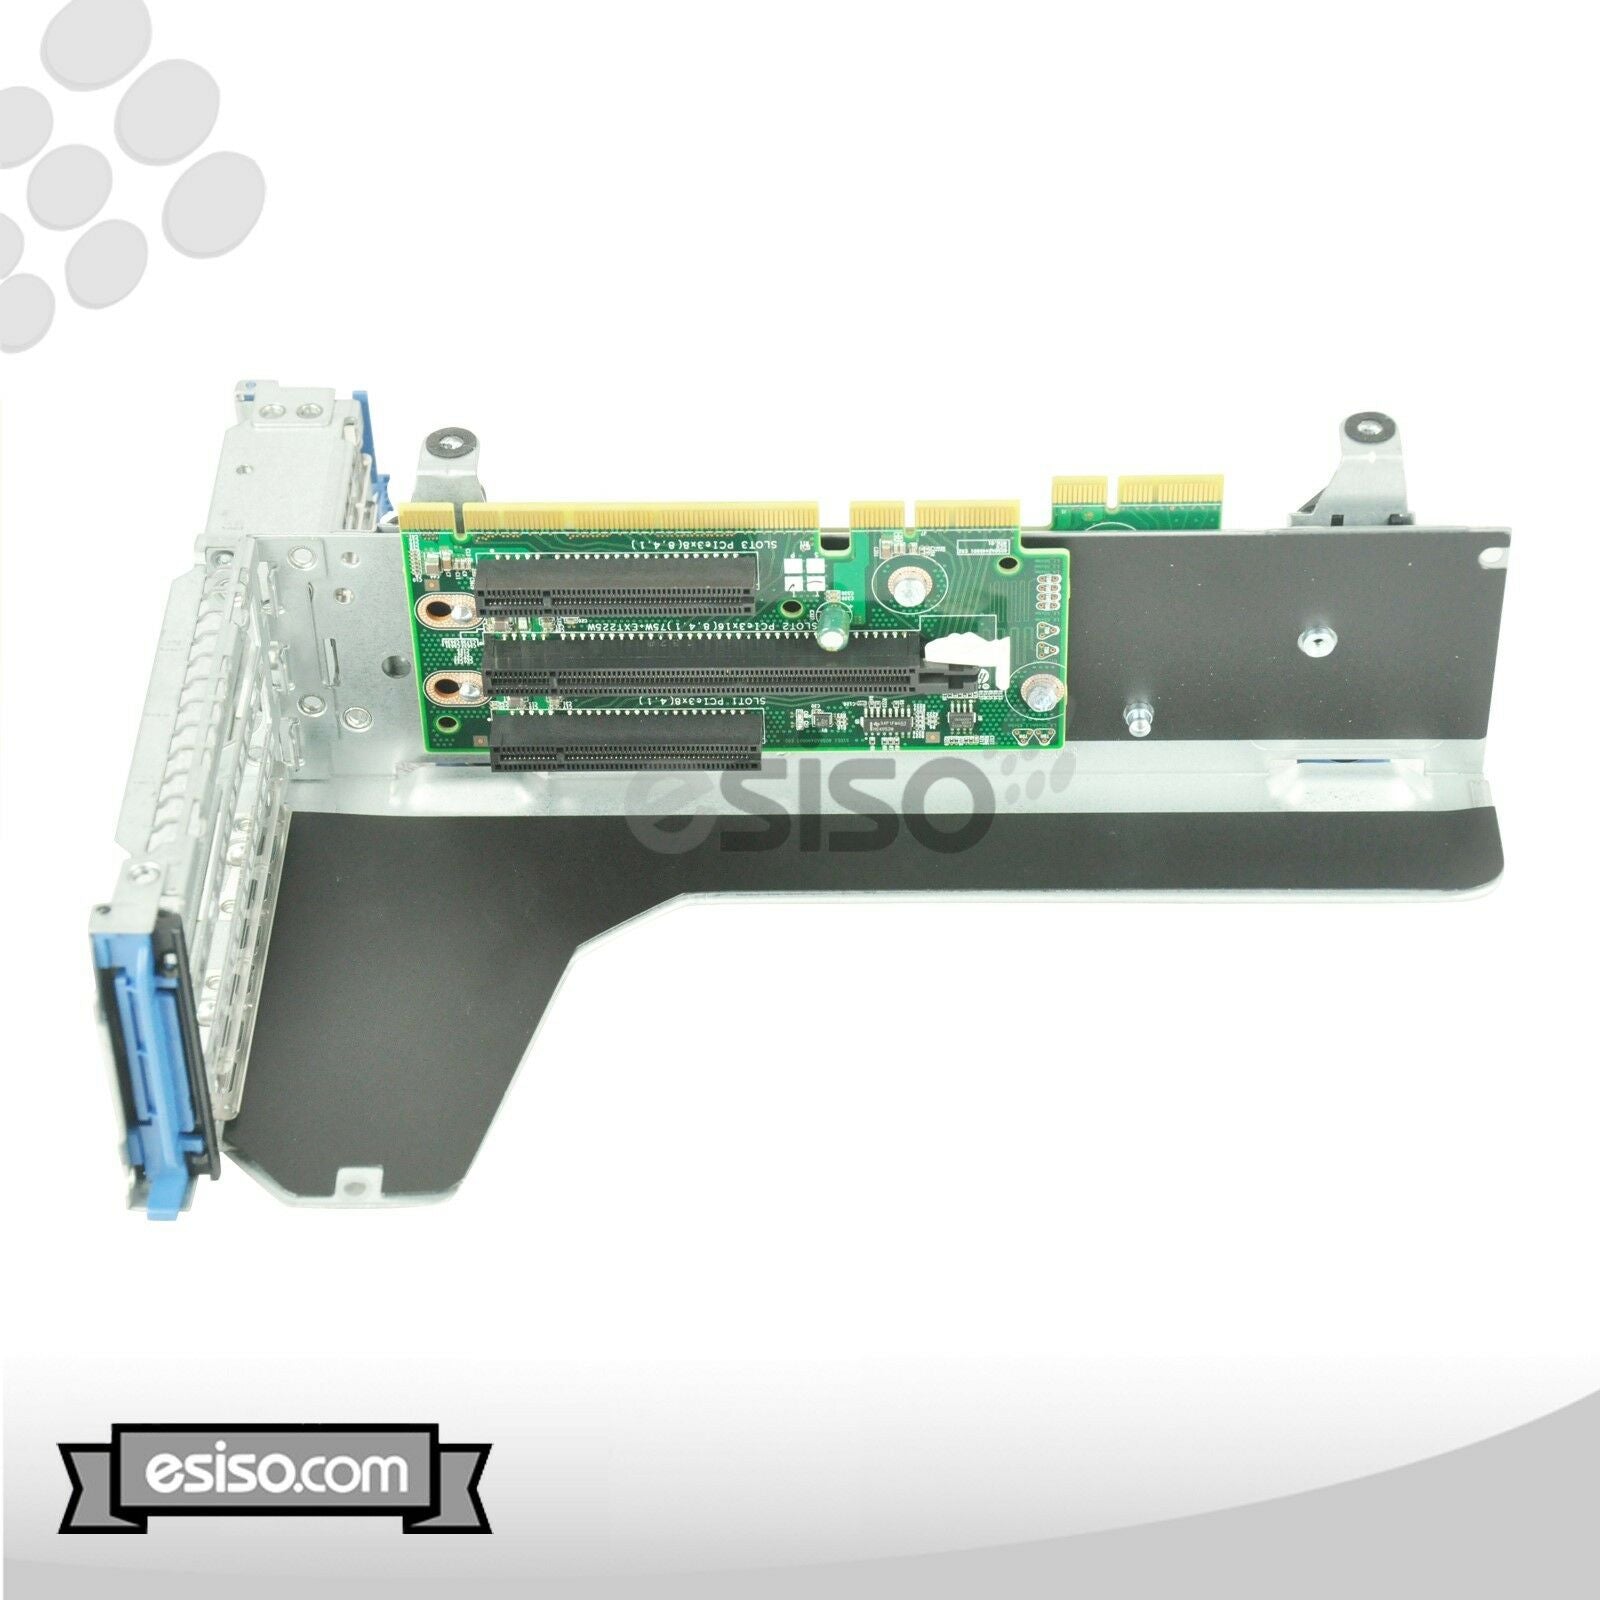 684895-001 HP PCIe PRIMARY RISER CAGE ASSEMBLY FOR PROLIANT DL380e G8 Gen8